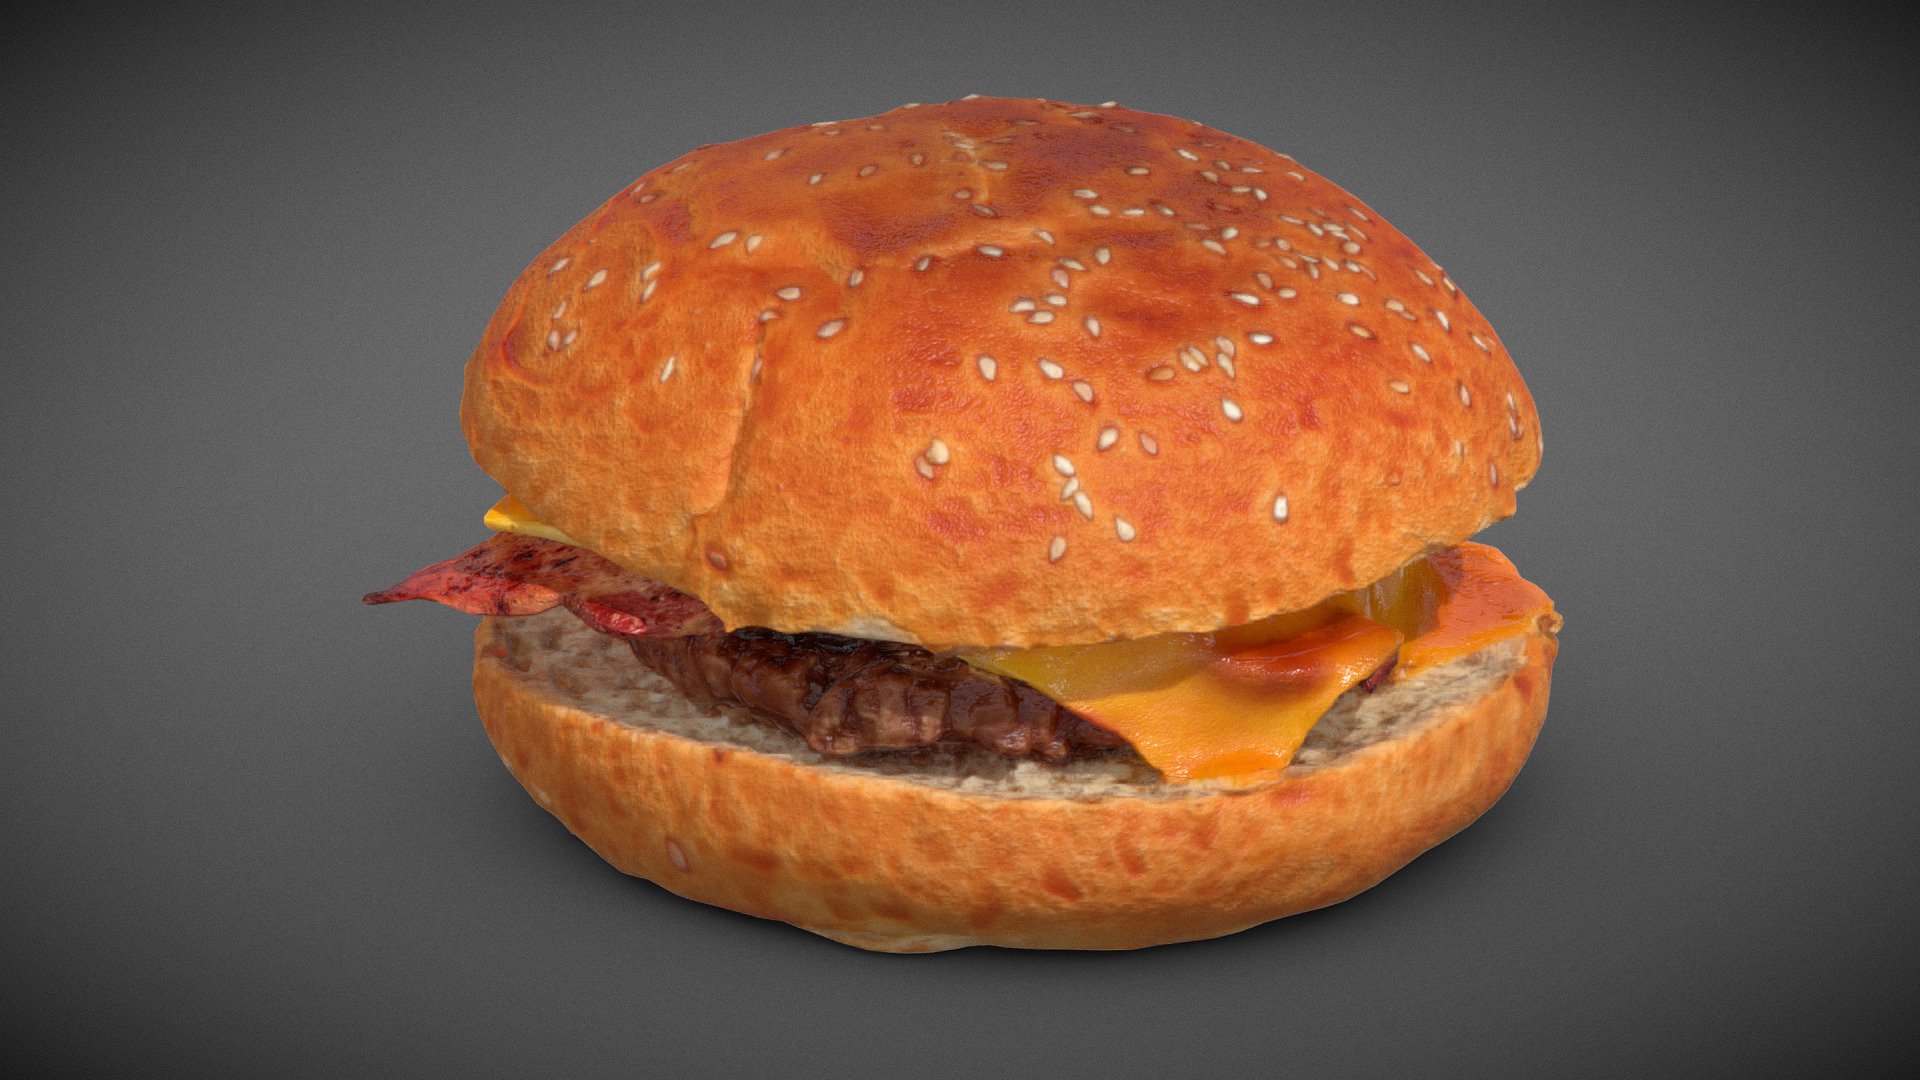 Photogrammetry scan of this Smashed Beacon and Cheese Burger  based on 289 pictures.
Quad retopology with 4K PBR  Texture, gameready asset lowpoly 3d model